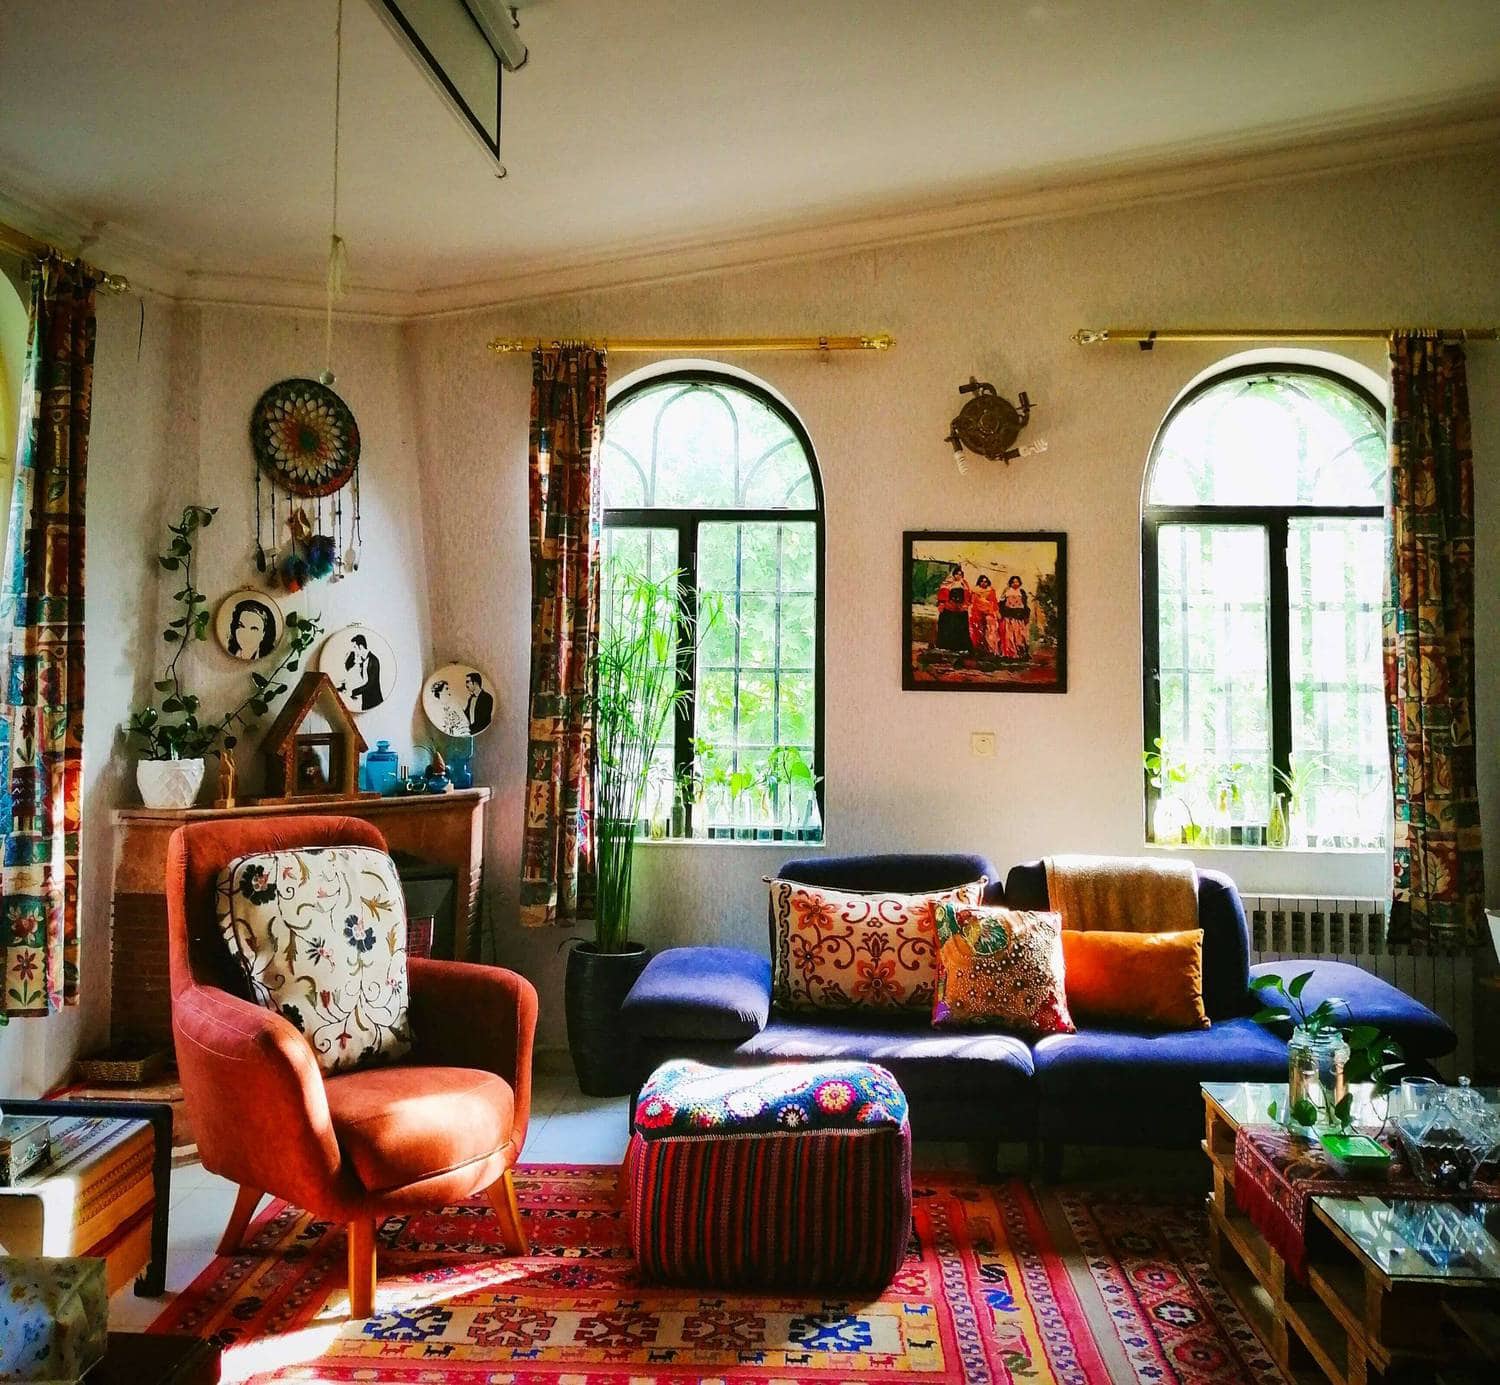 Eclectic Interior Design: Five Tips For Decorating Your Room in an ...